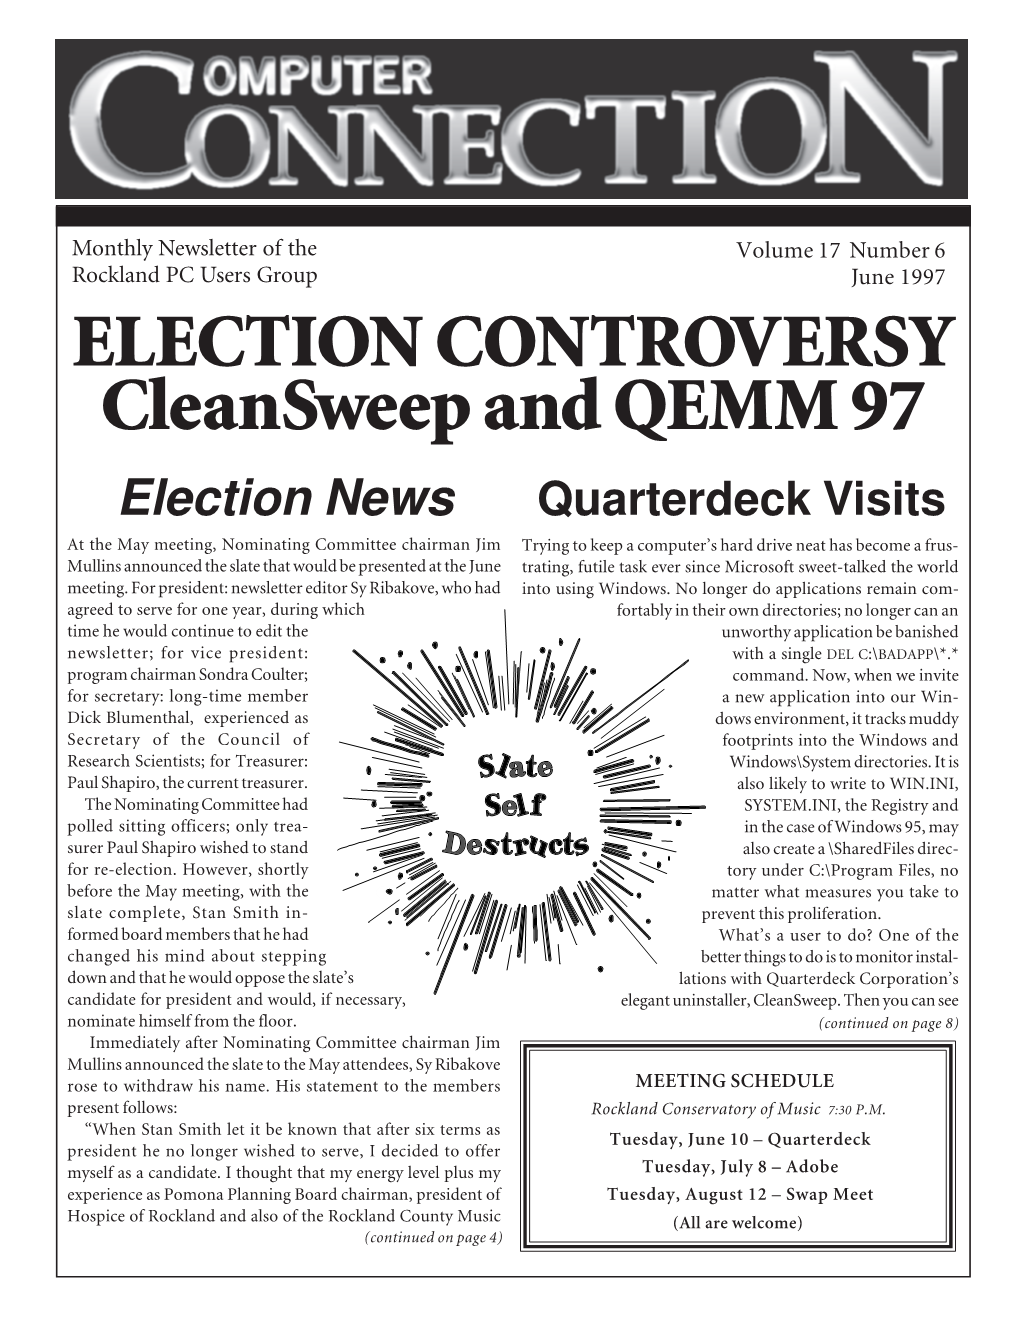 ELECTION CONTROVERSY Cleansweep and QEMM 97